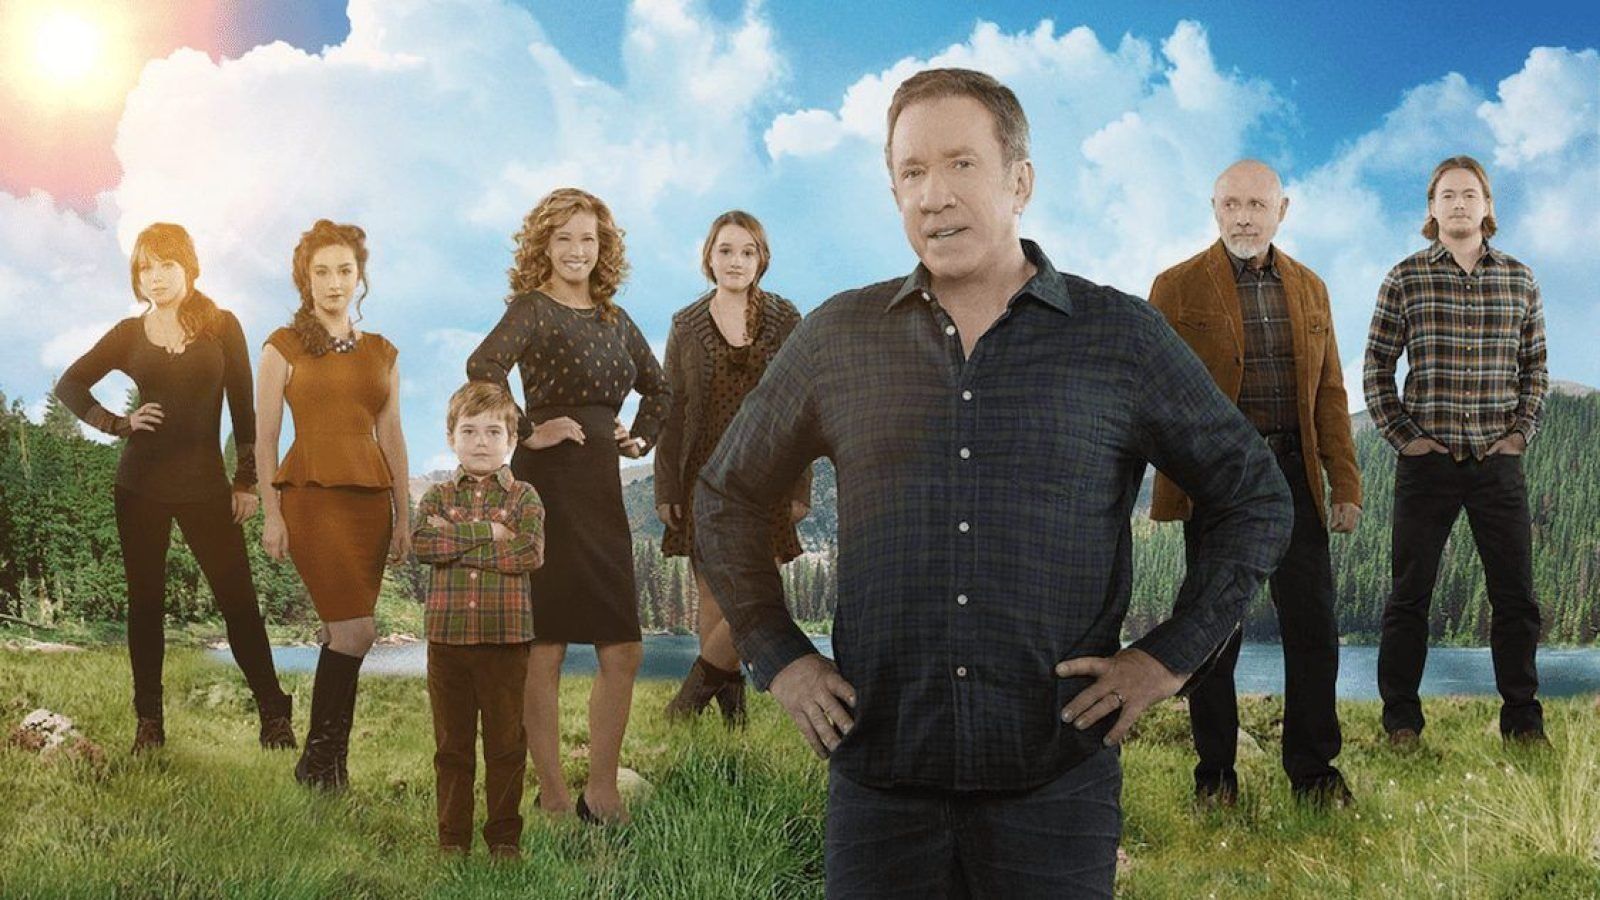 Tim Allen Returns With New Sitcom – Is Hollywood Seeing The End of Woke?